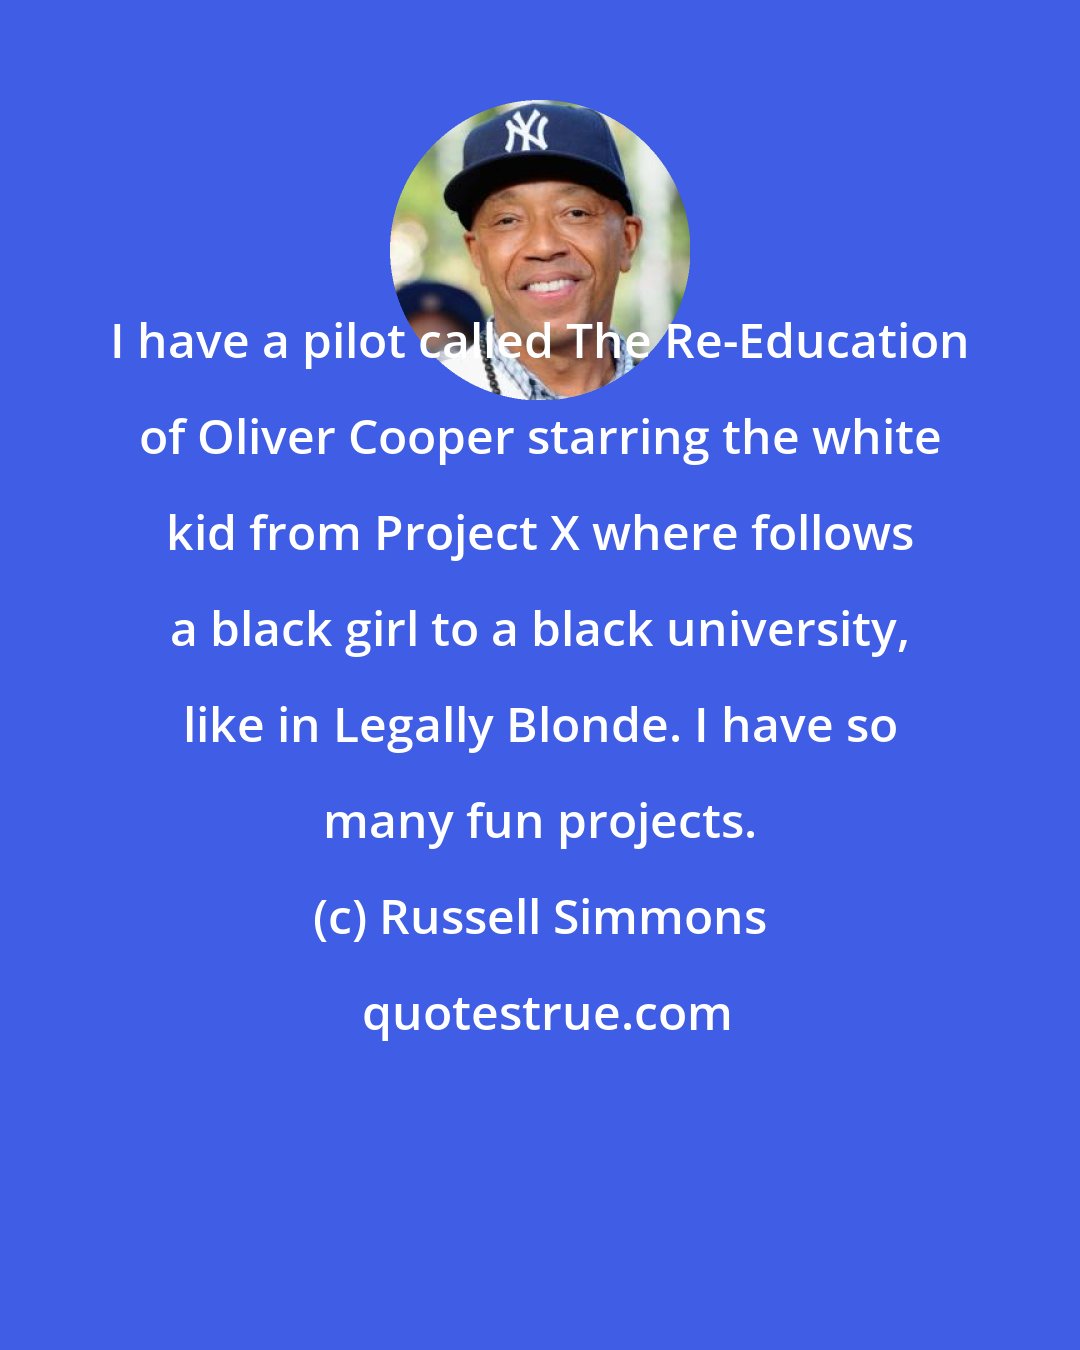 Russell Simmons: I have a pilot called The Re-Education of Oliver Cooper starring the white kid from Project X where follows a black girl to a black university, like in Legally Blonde. I have so many fun projects.